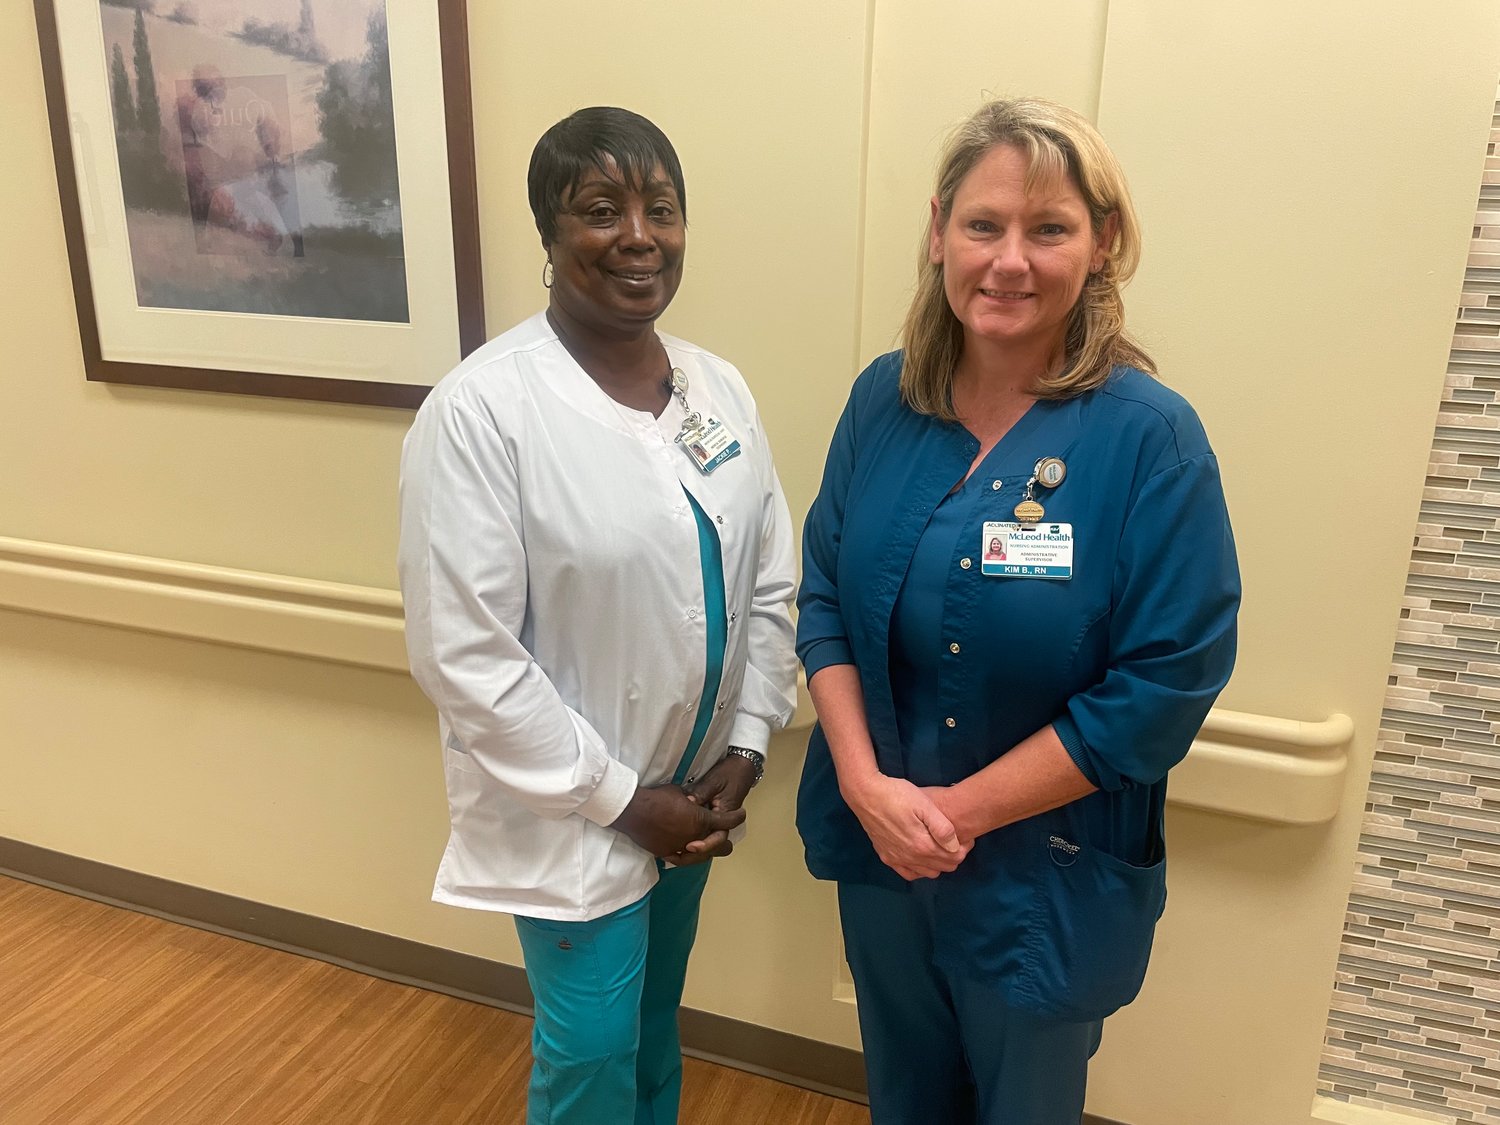 2022 Nurse of the Year and Support Person of the Year Award Recipients: Kim Brunson, McLeod Health Clarendon Registered Nurse of the Year and Jackqulynn Pompey, Support Person of the Year